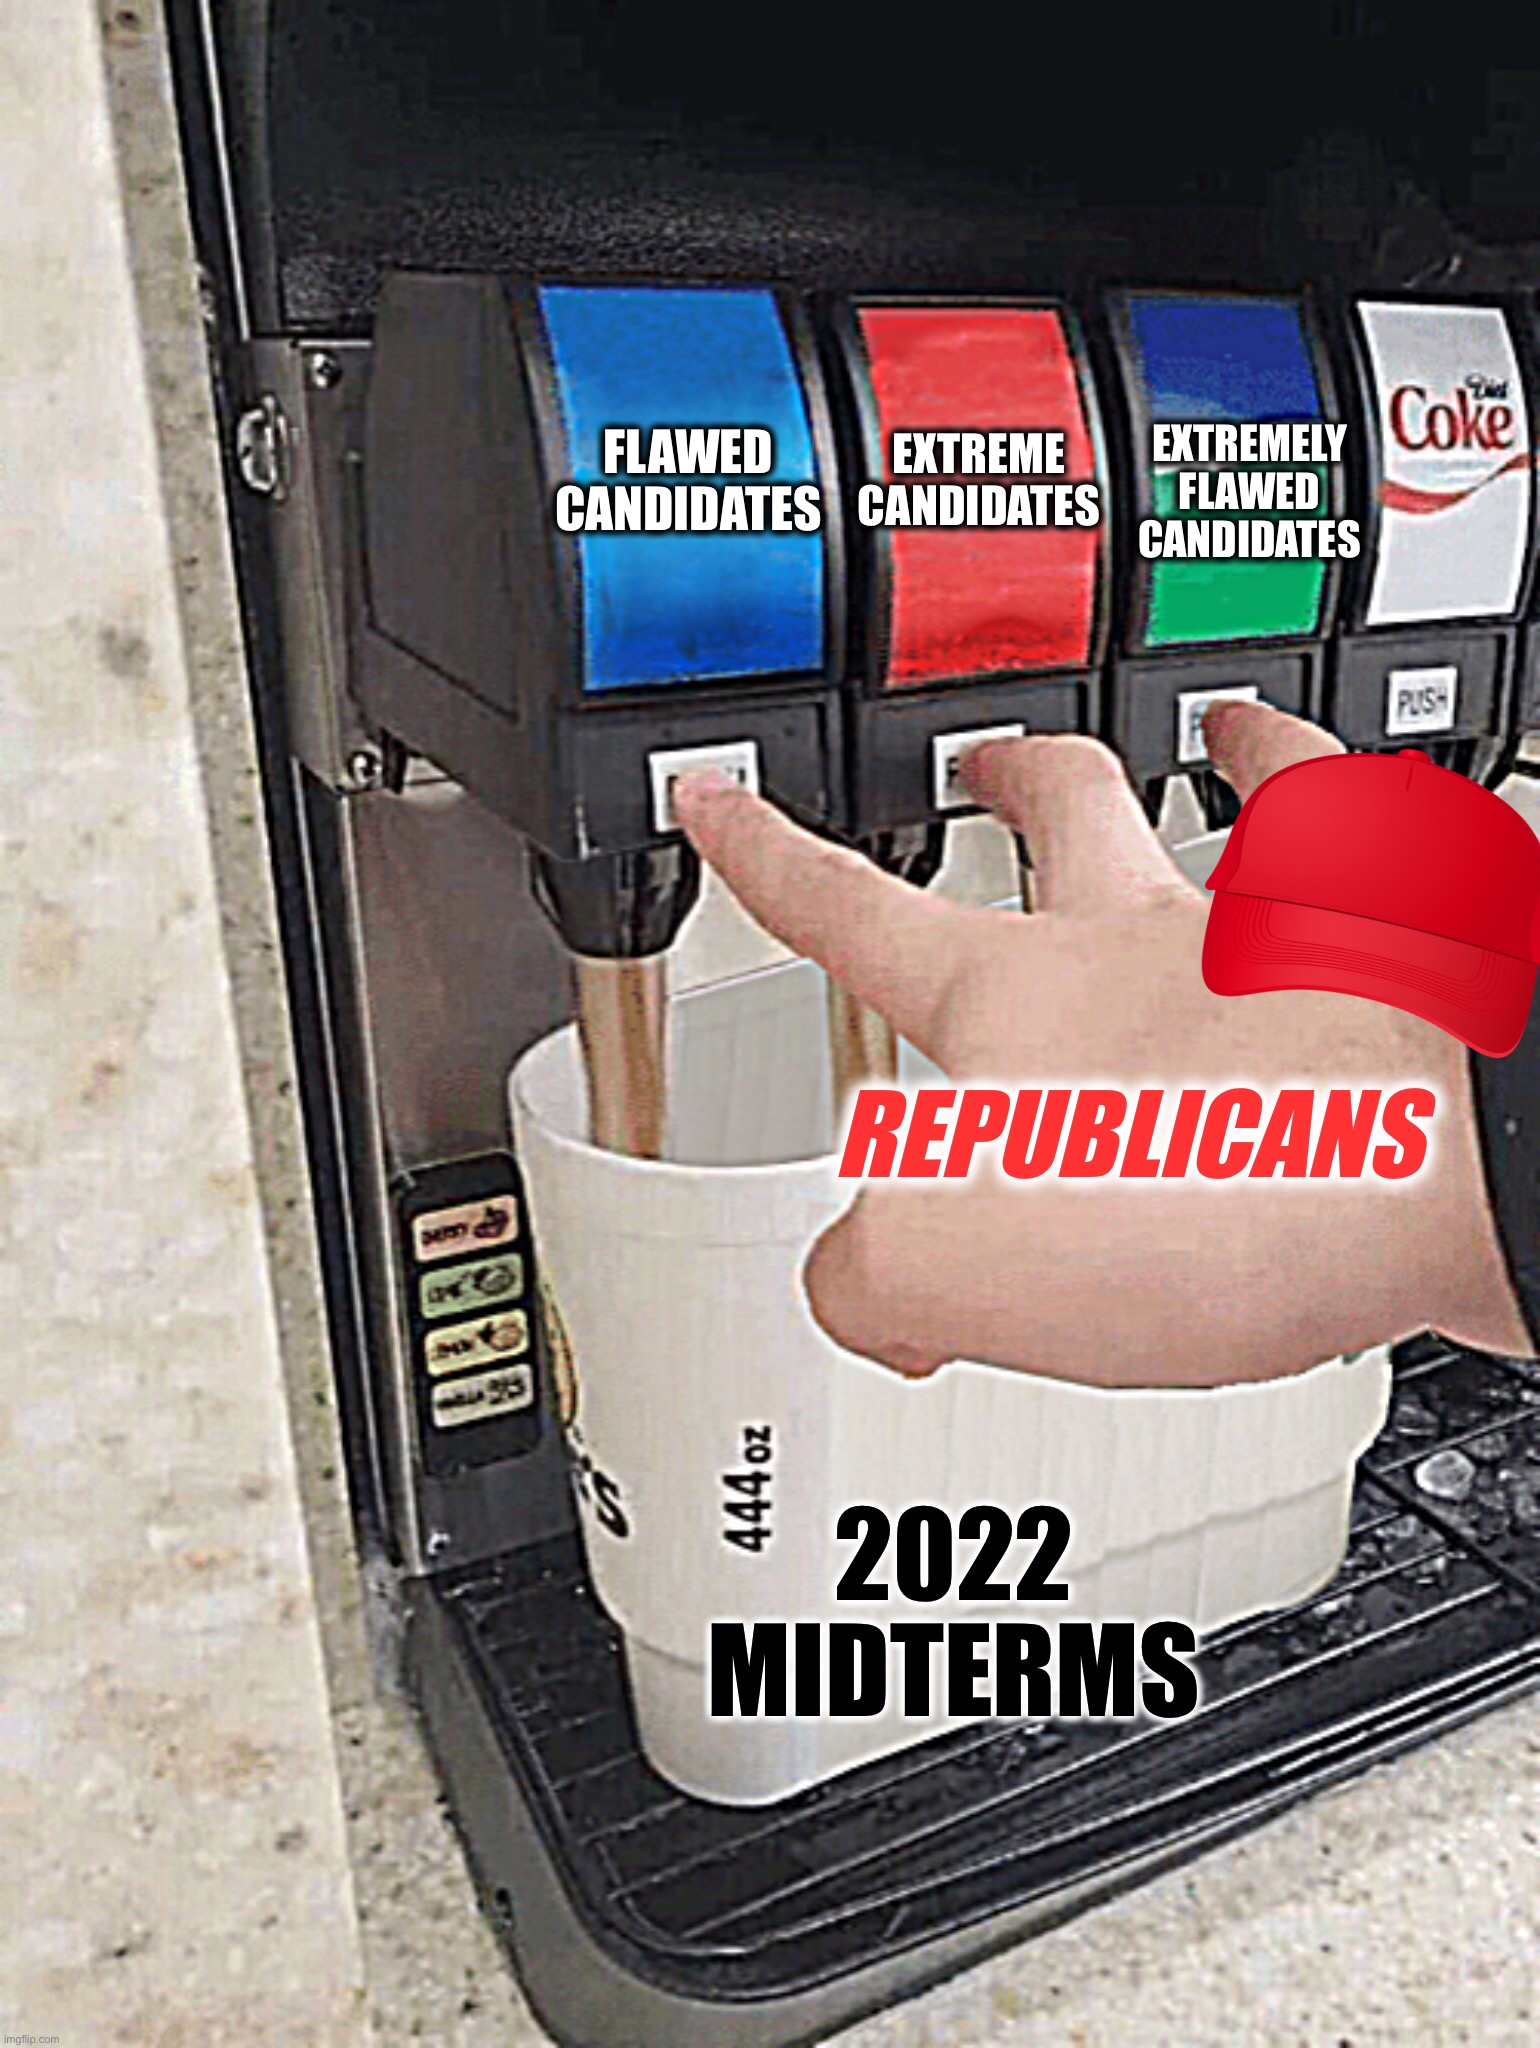 Pushing three soda buttons | EXTREMELY FLAWED CANDIDATES; FLAWED CANDIDATES; EXTREME CANDIDATES; REPUBLICANS; 2022 MIDTERMS | image tagged in pushing three soda buttons | made w/ Imgflip meme maker